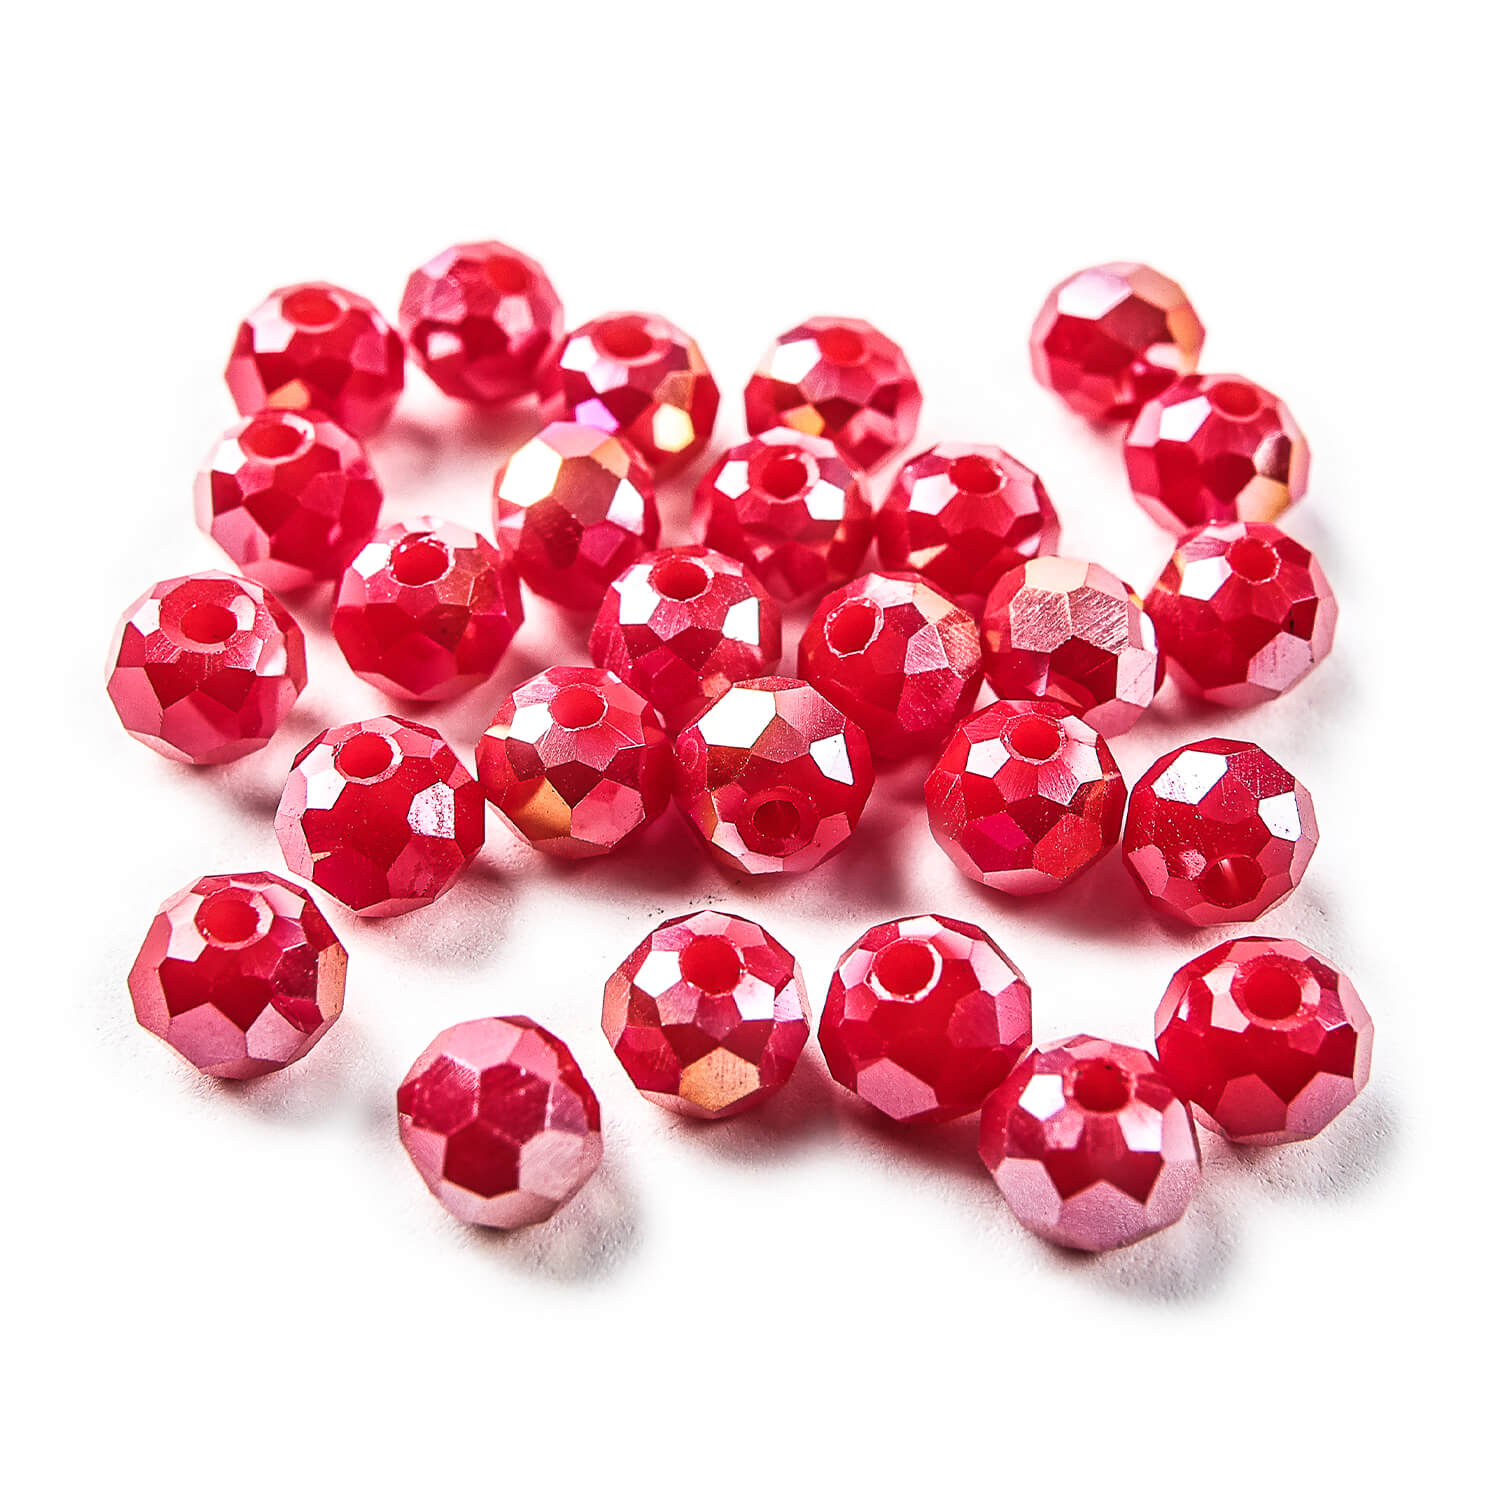 Potomac Crystal Rondelle Beads - Opaque Red AB 3x4mm, Pack of 100